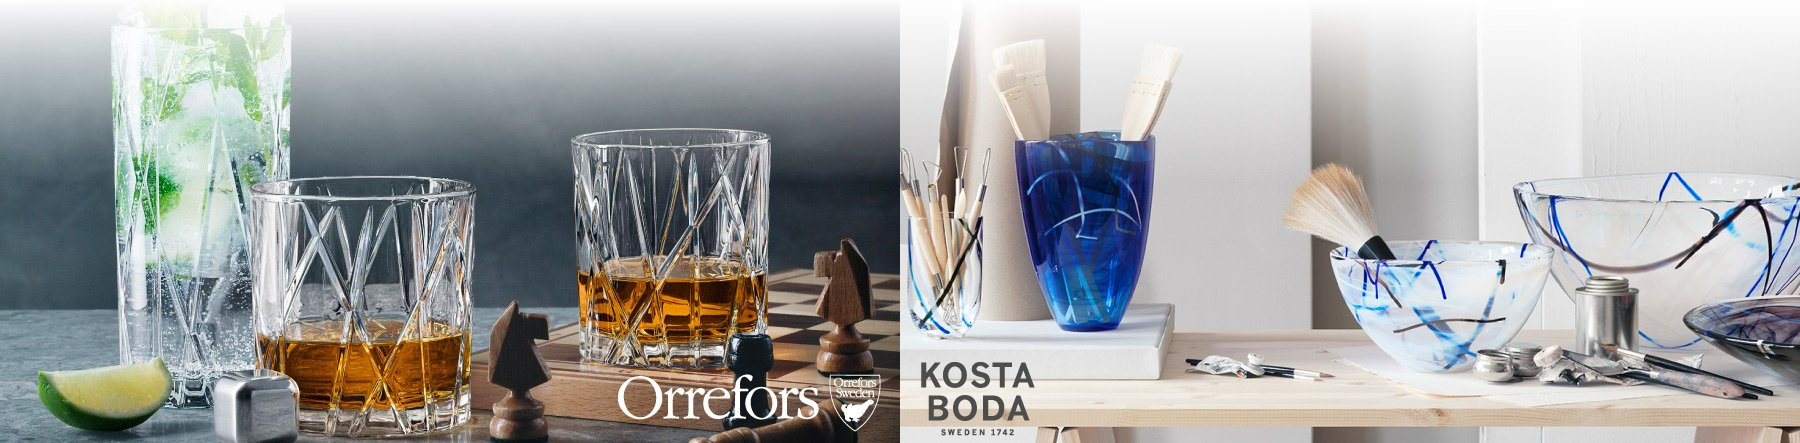 16 Cute Kosta Boda Purple Vase 2024 free download kosta boda purple vase of kosta boda the clear sticker now used today with a san serif with regard to orrefors kosta boda sweden